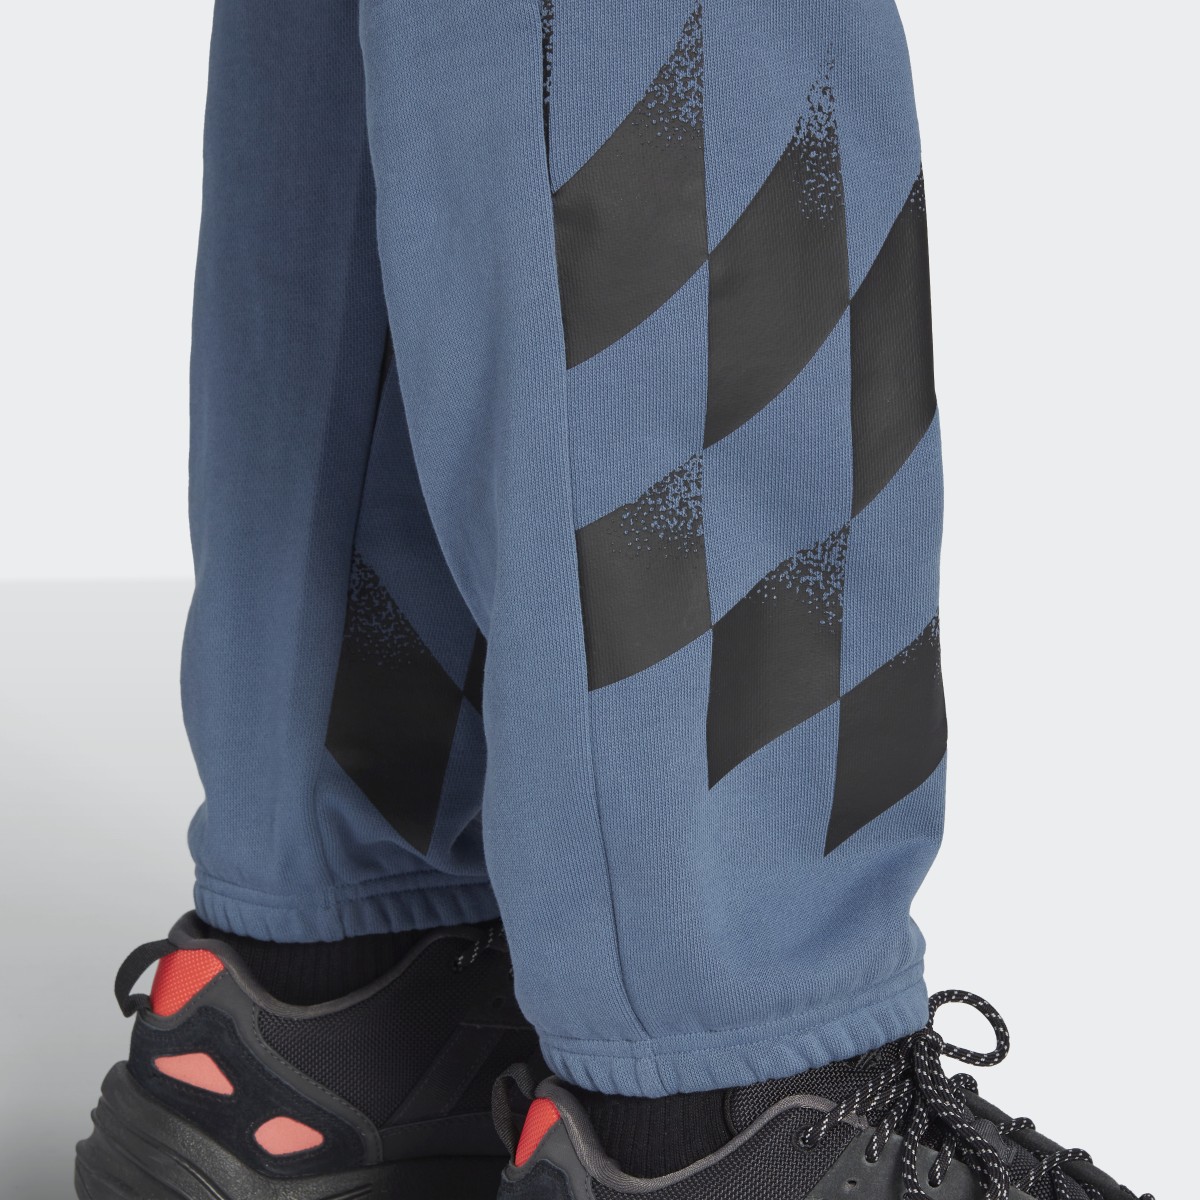 Adidas Rekive Placed Graphic Sweat Pants. 8